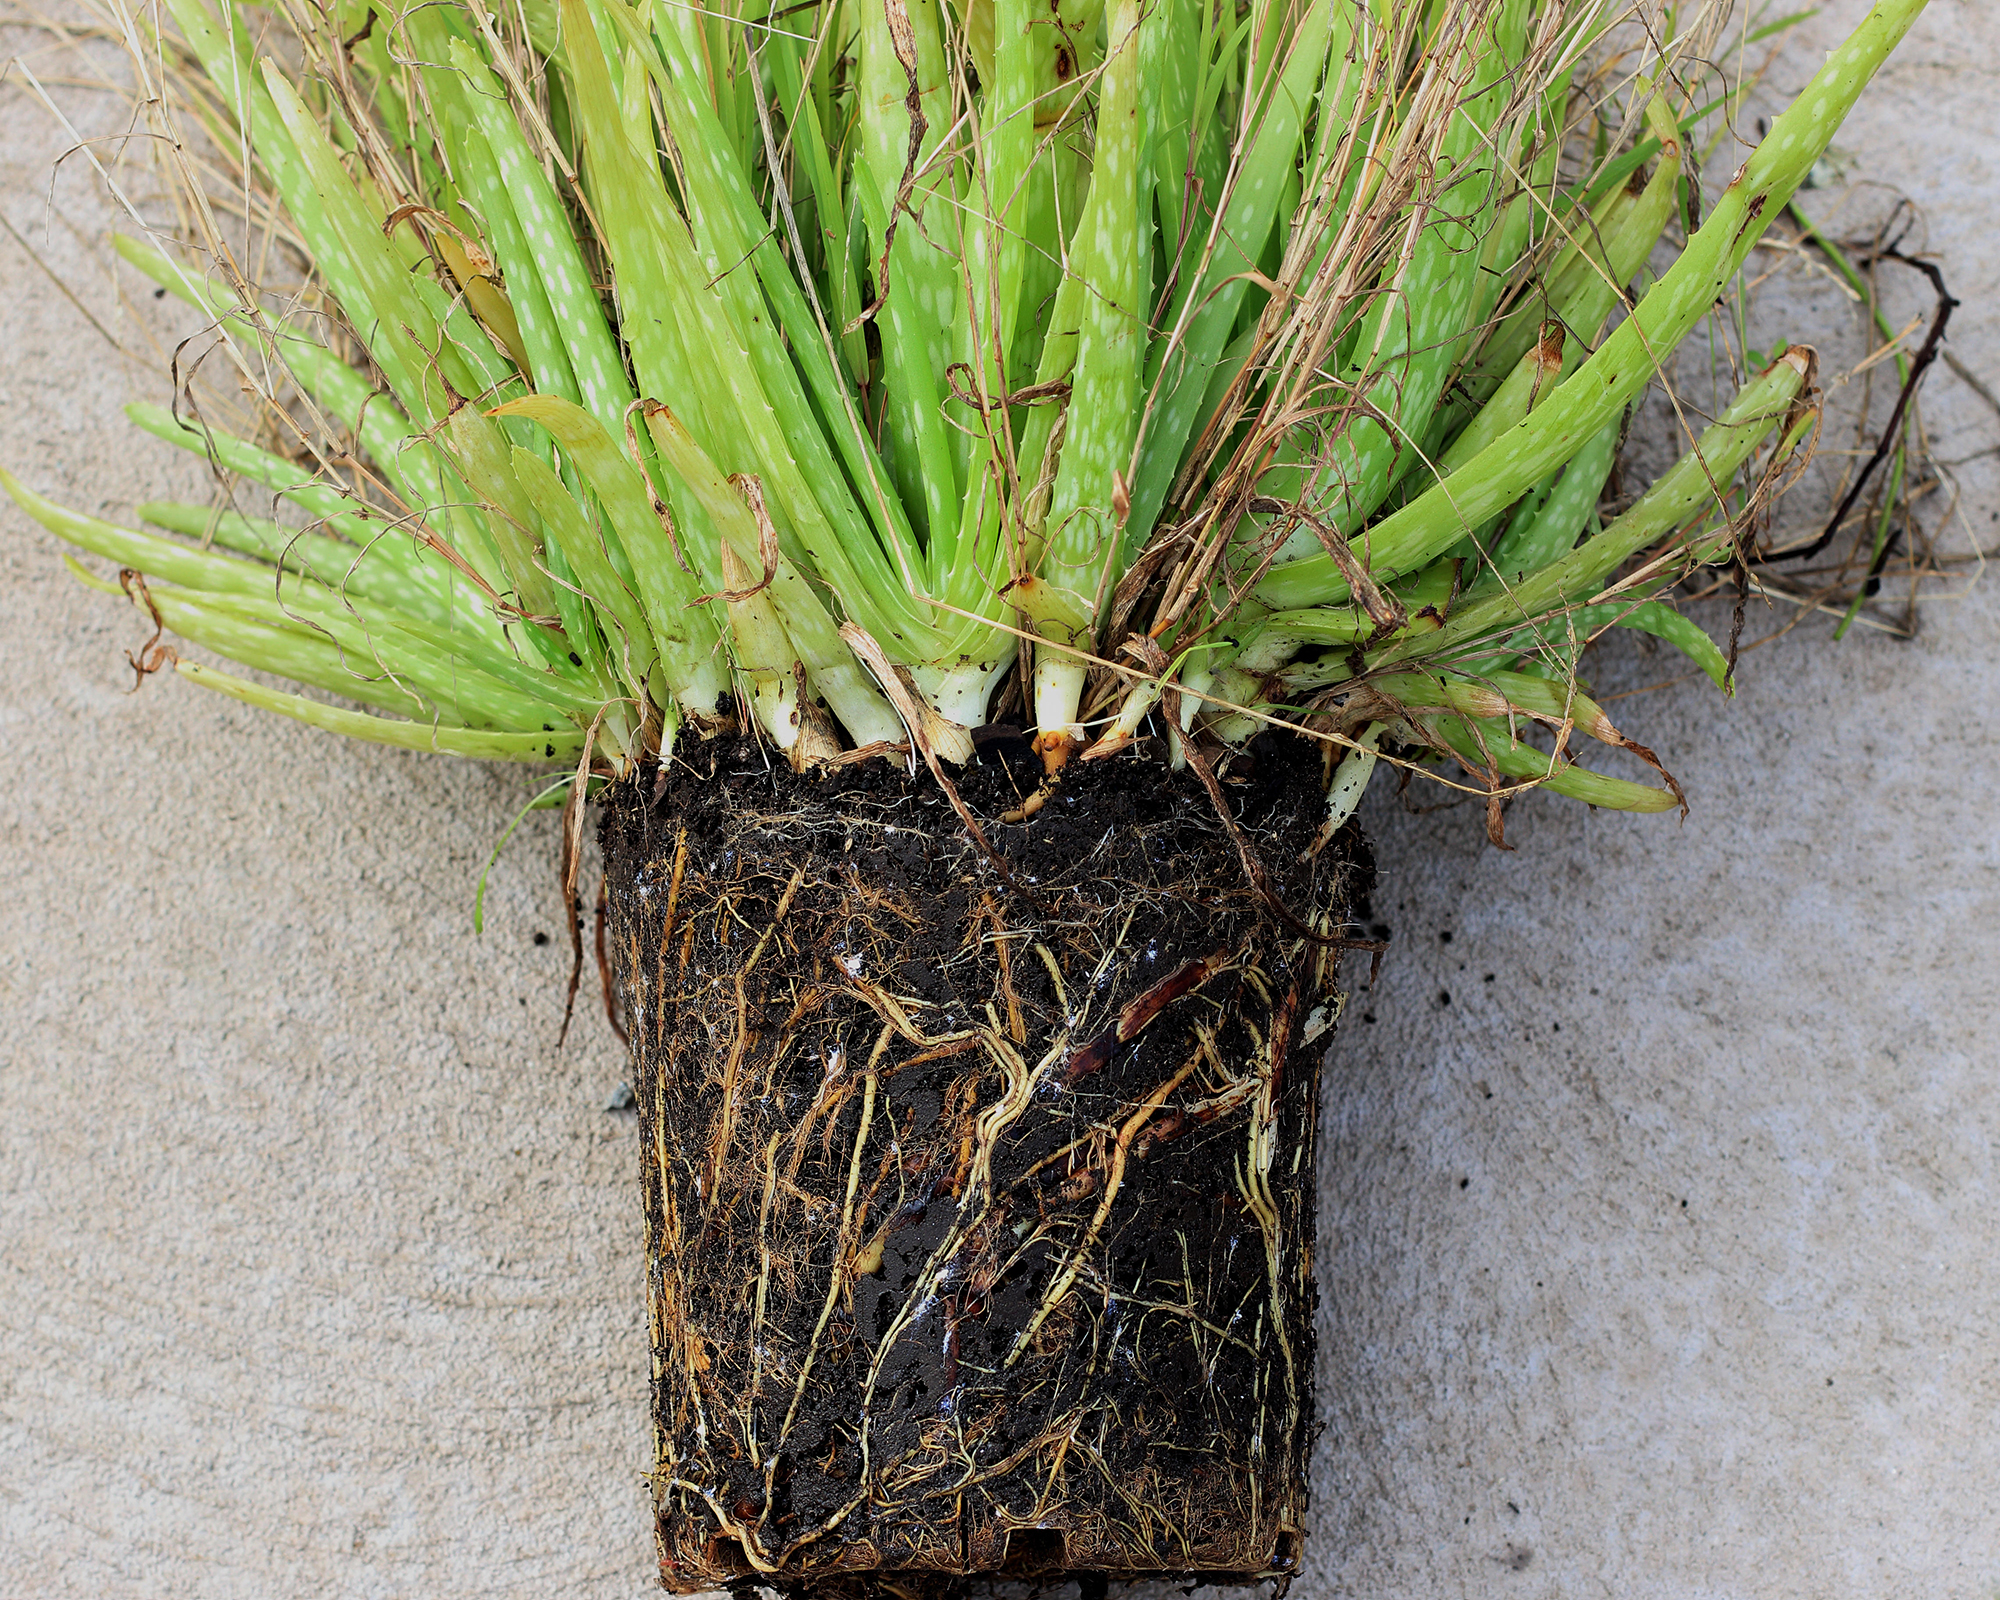 Soil and roots of aloe vera plant